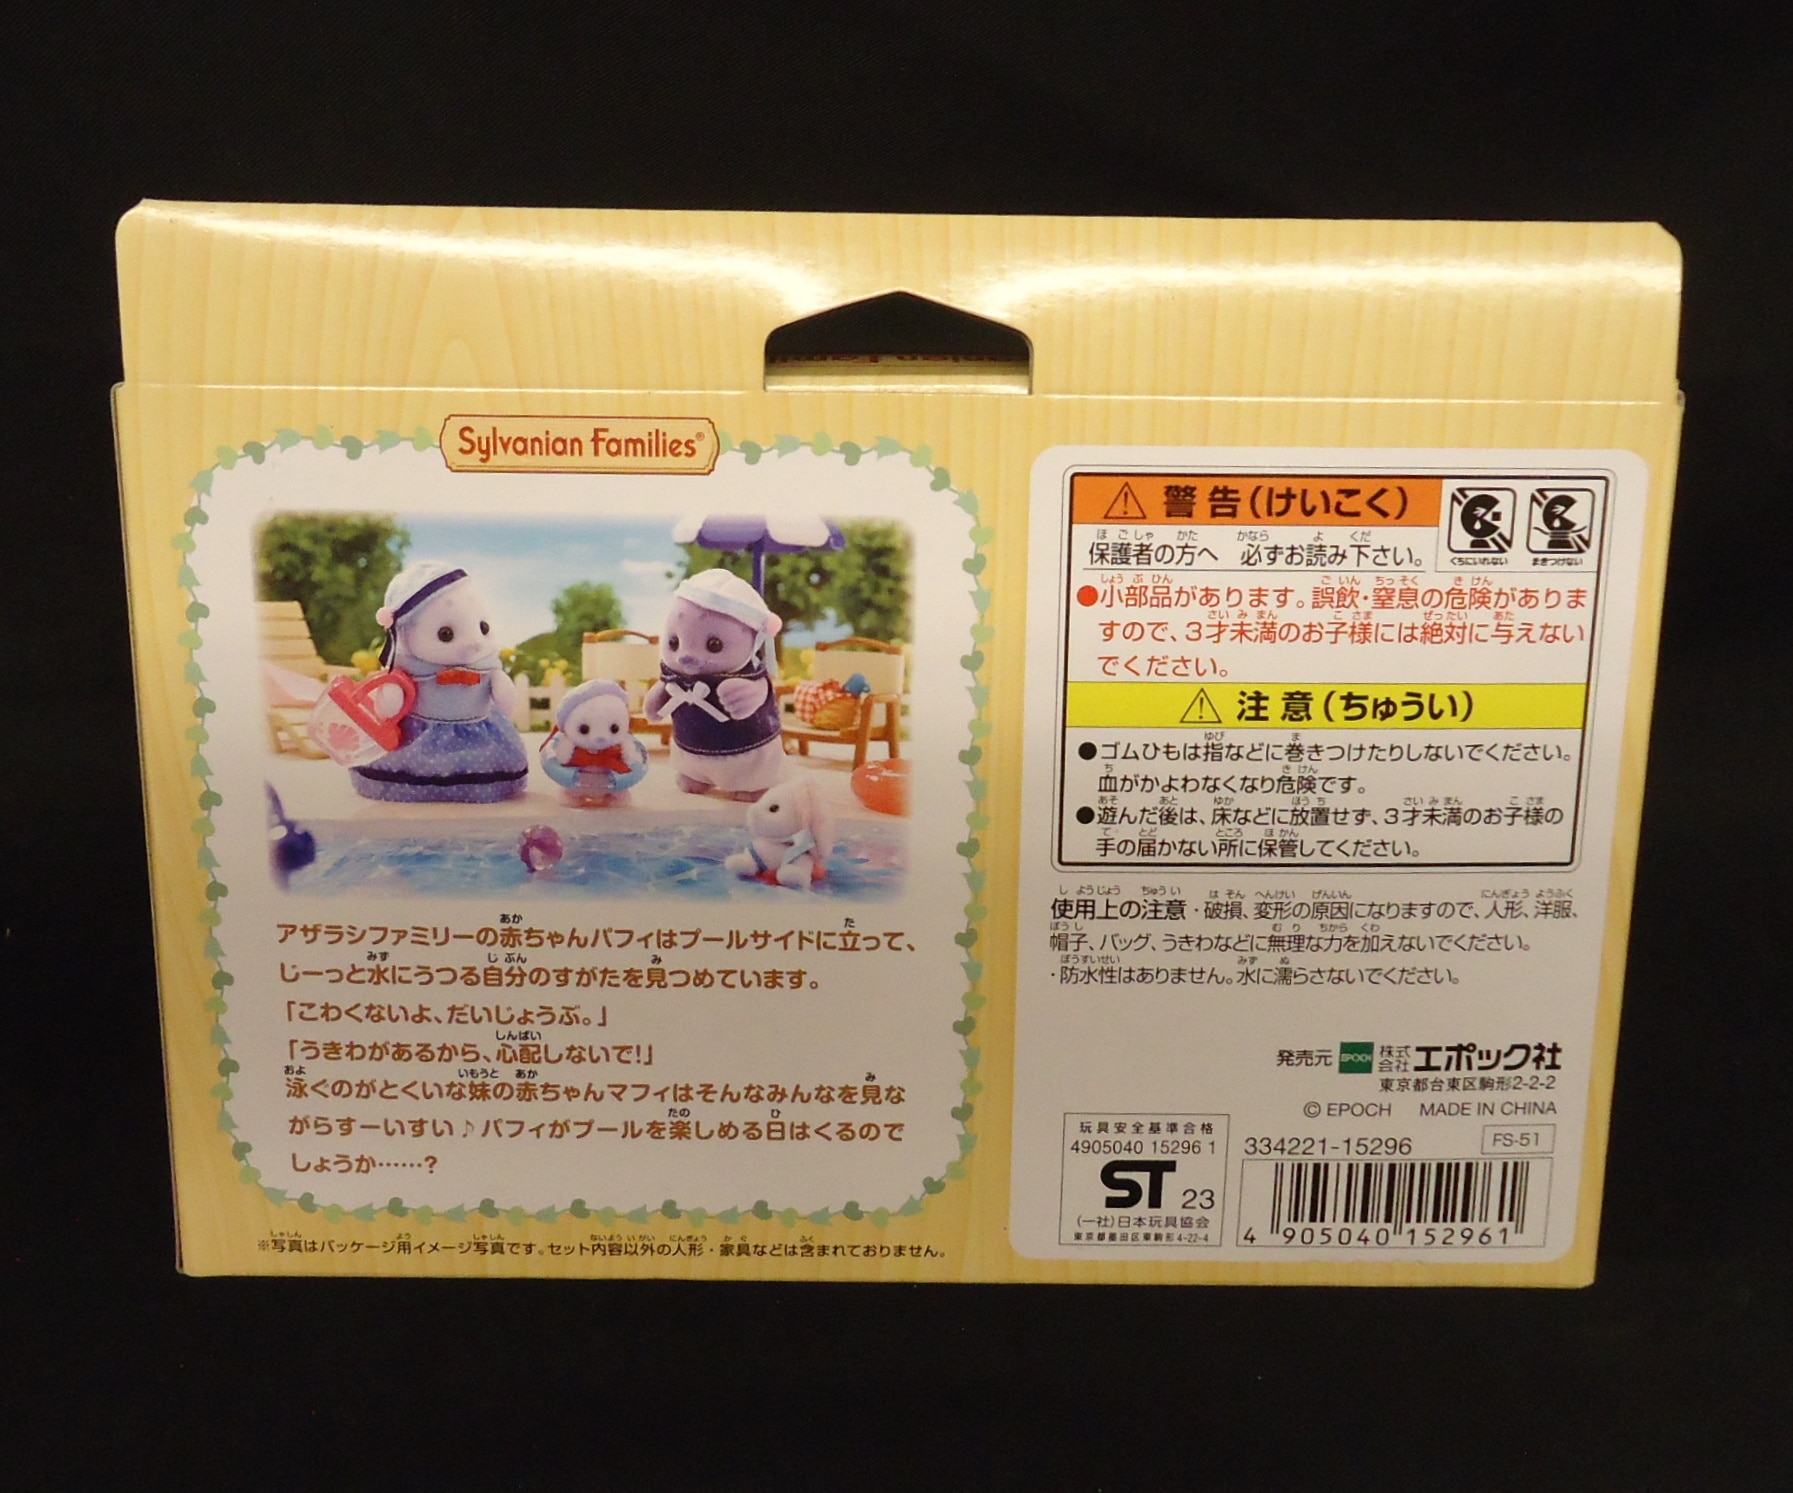 Sylvanian Families SEAL FAMILY FS-51 Calico Critters Epoch Japan